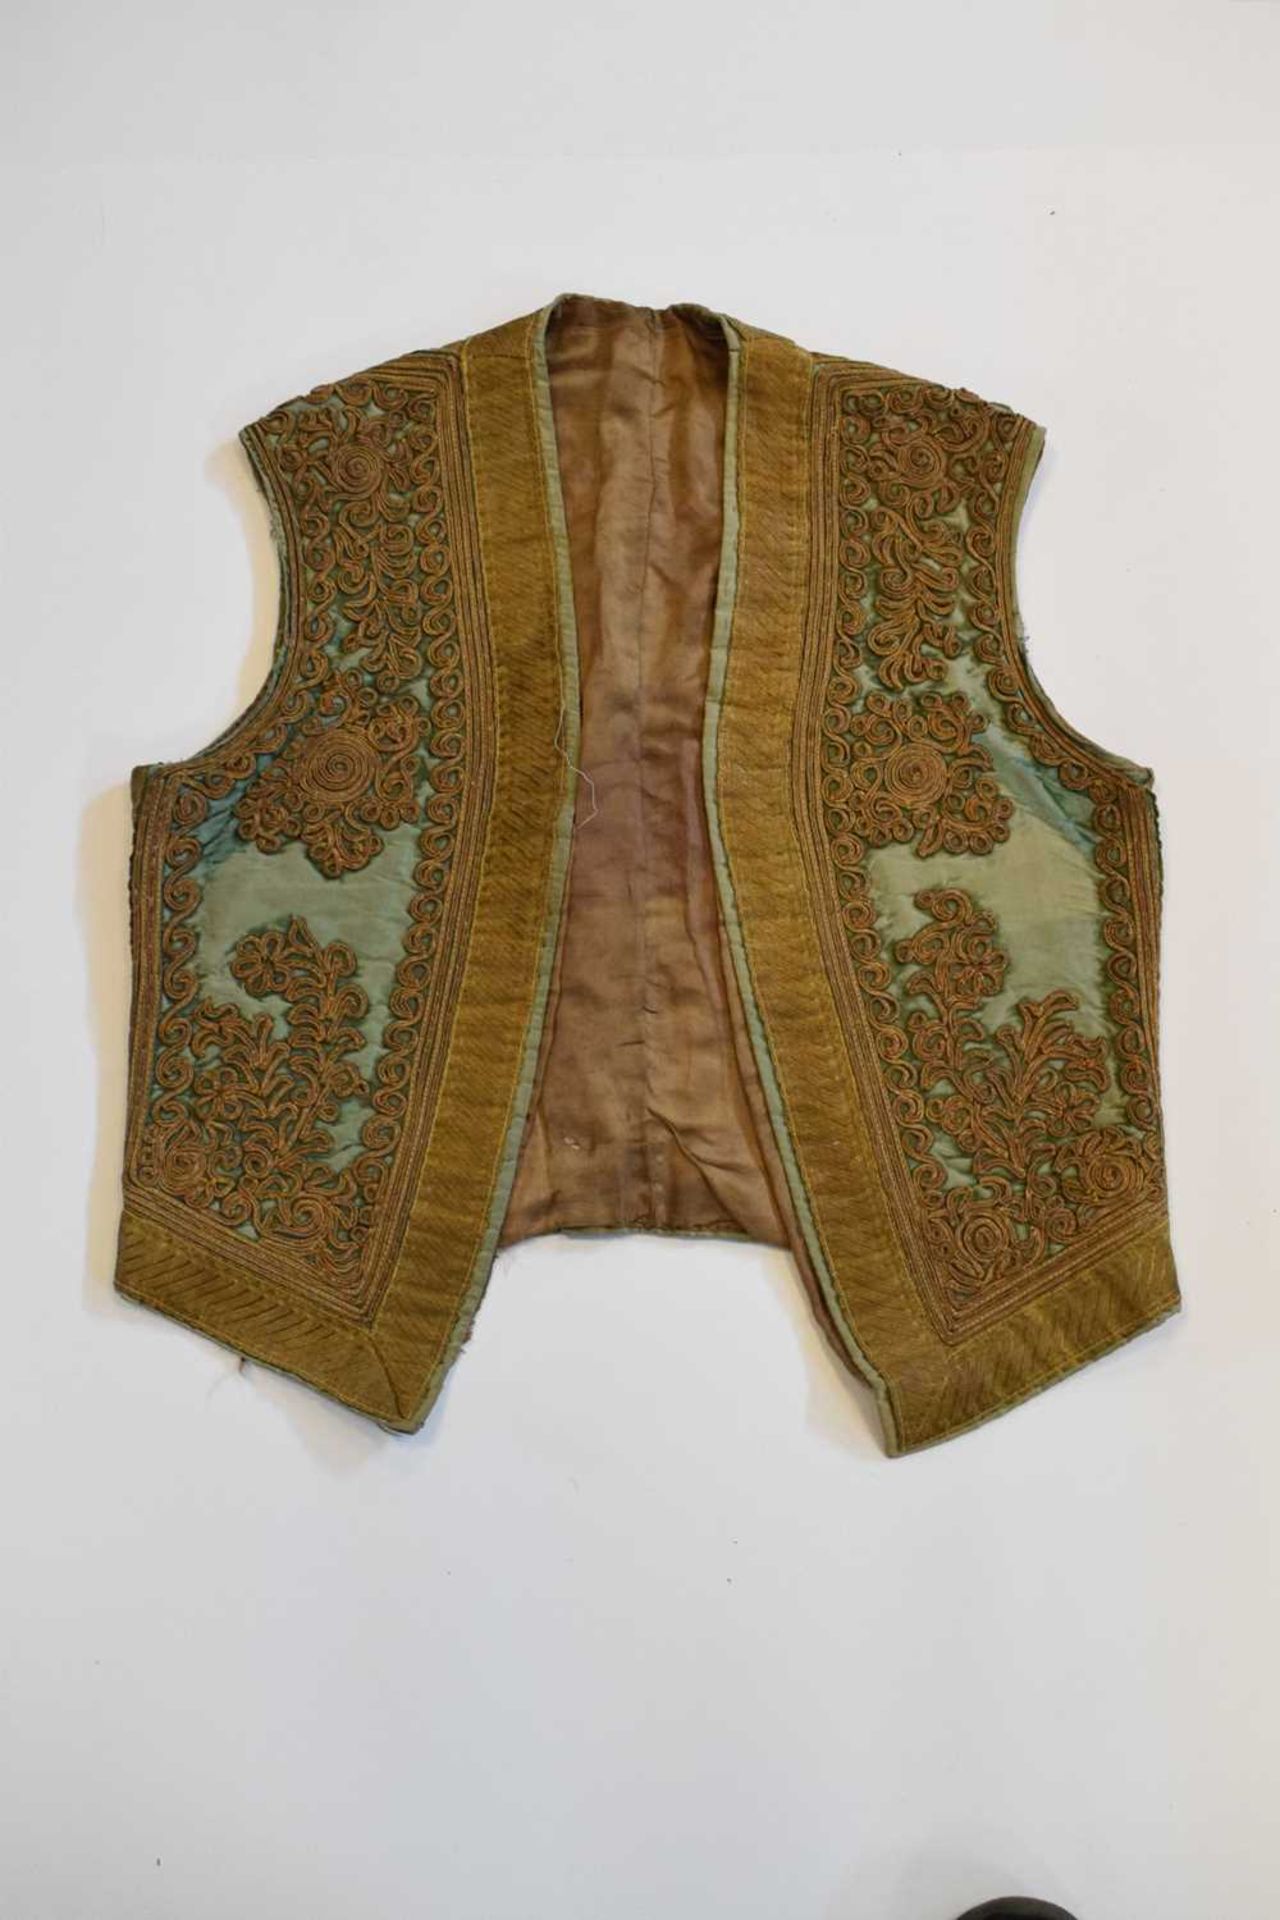 Gold thread trimmed waistcoats, etc - Image 5 of 19